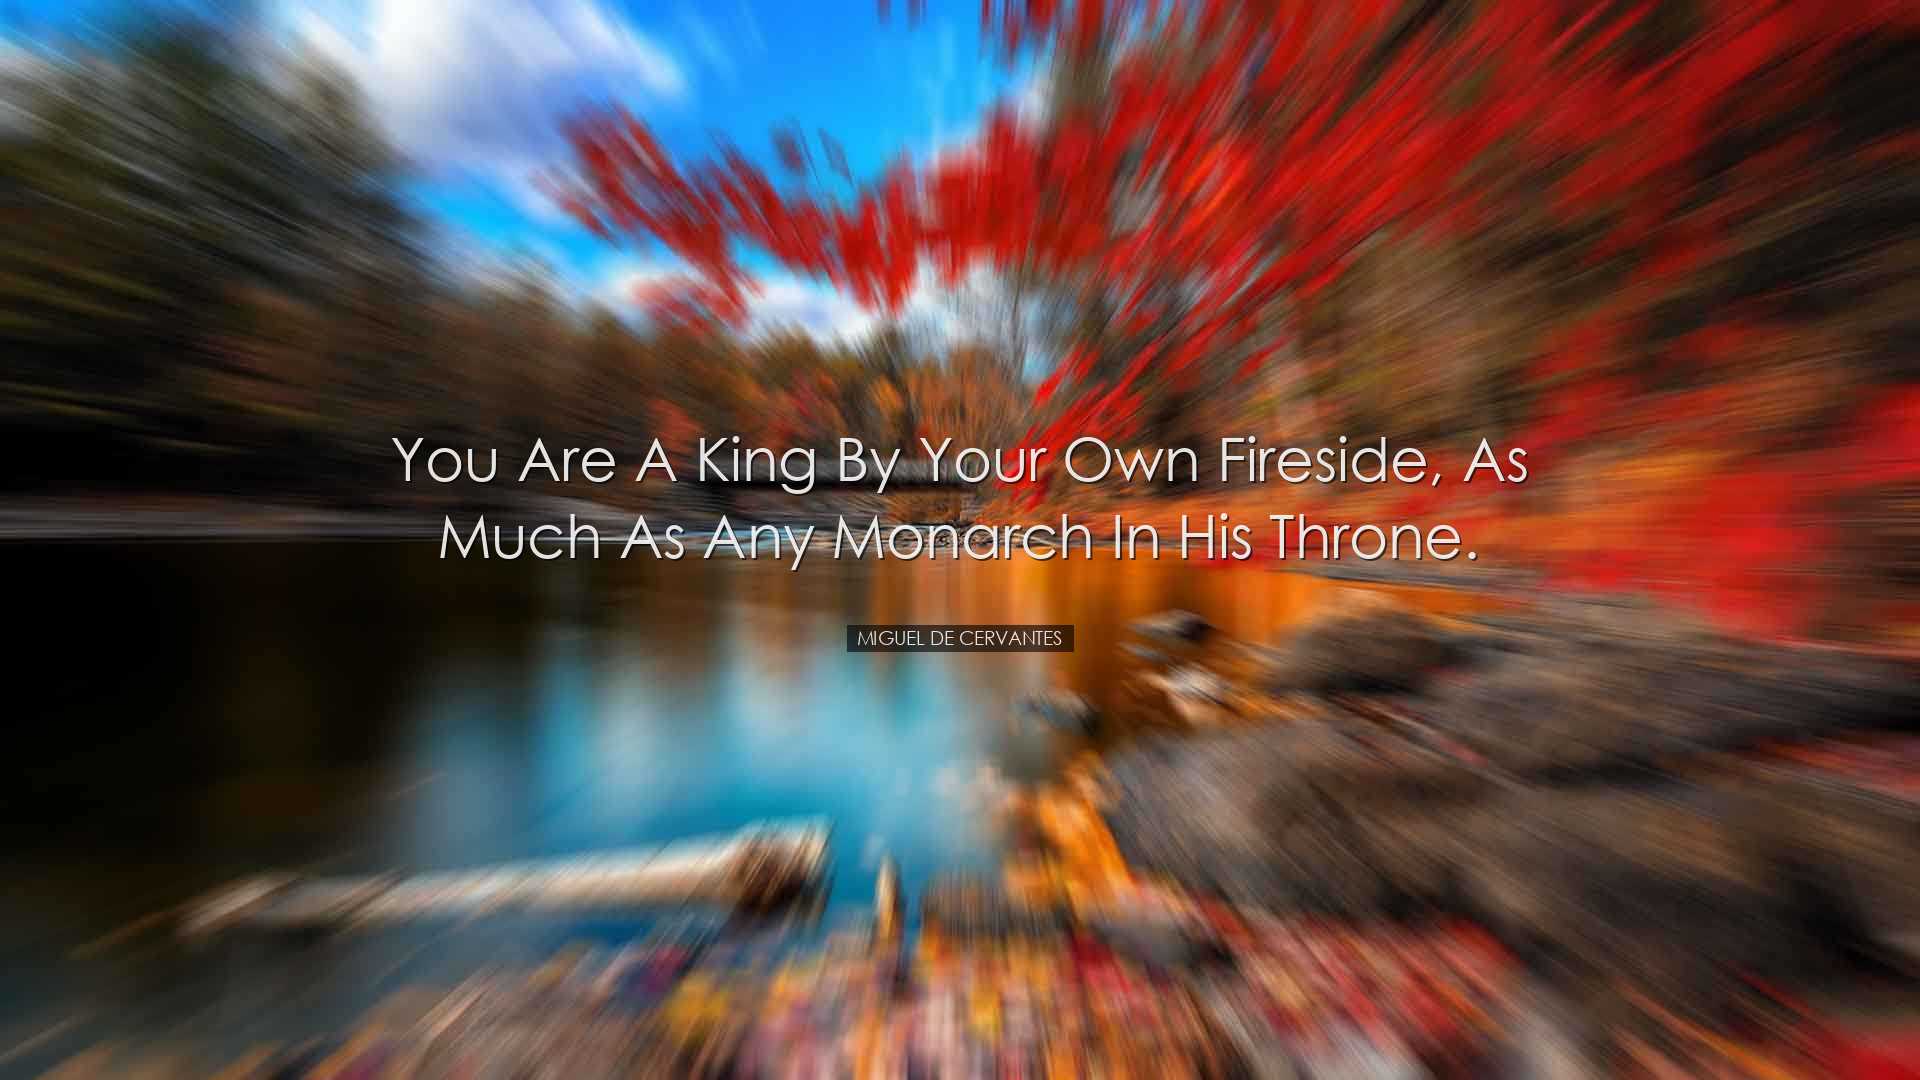 You are a king by your own fireside, as much as any monarch in his